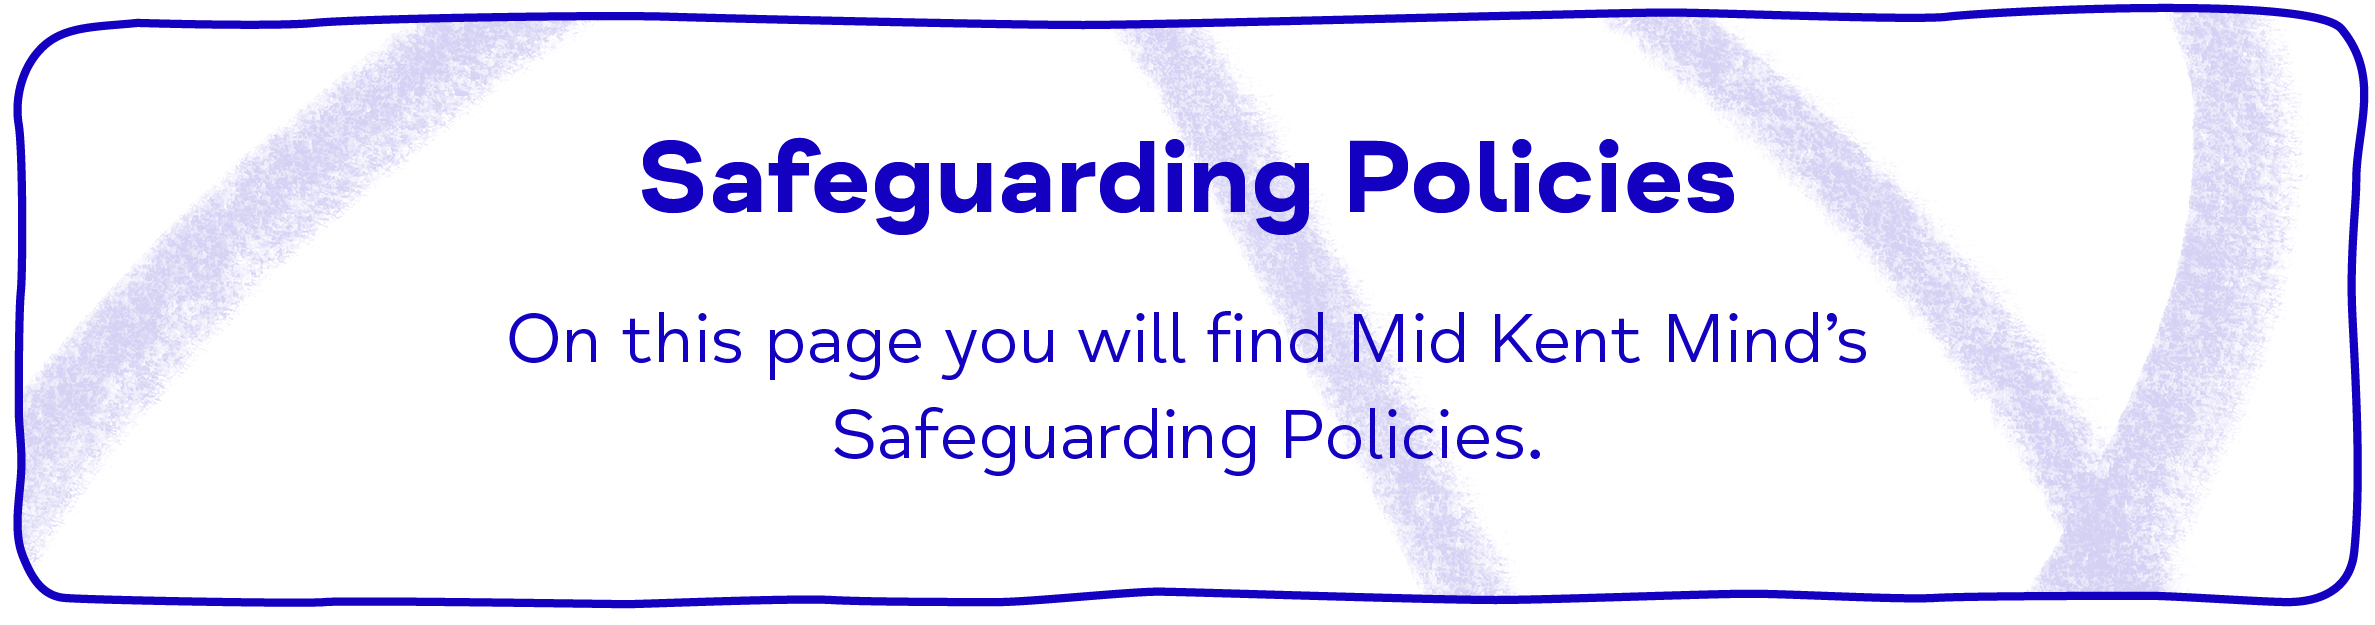 Safeguarding Policies On this page you will find Mid Kent Mind’s Safeguarding Policies.